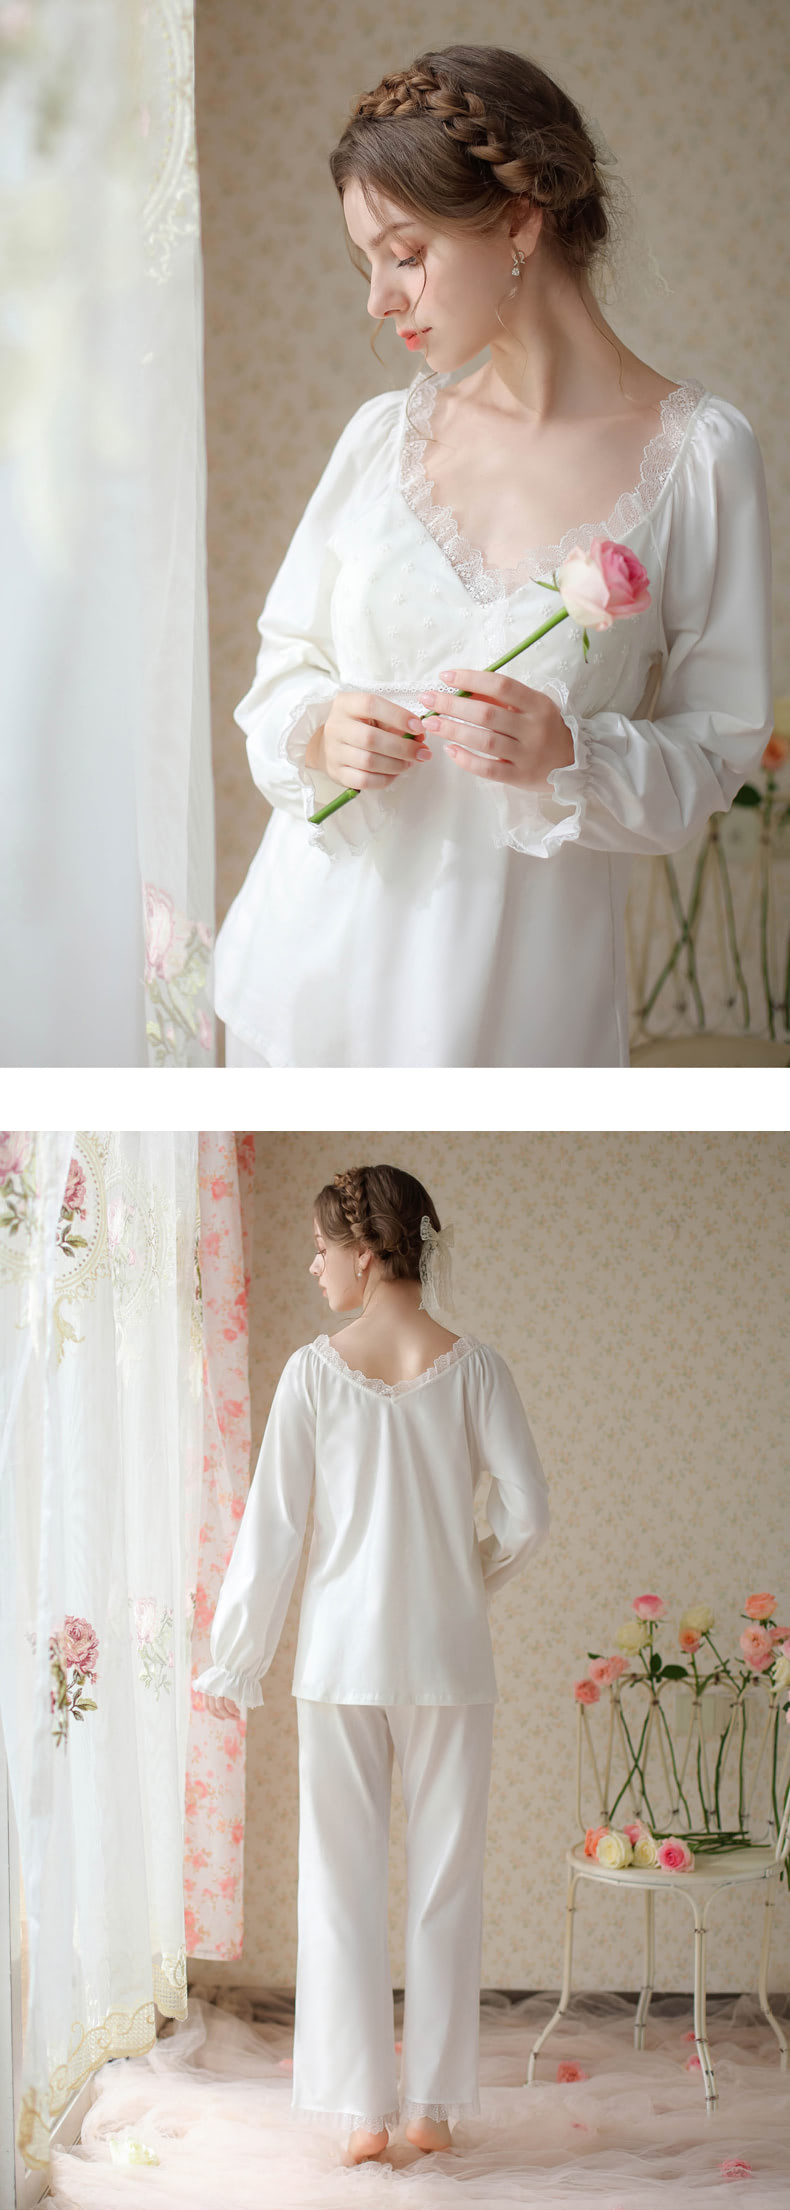 Vintage-Sweet-Cotton-Long-Sleeve-Home-Casual-Clothes-Set18.jpg